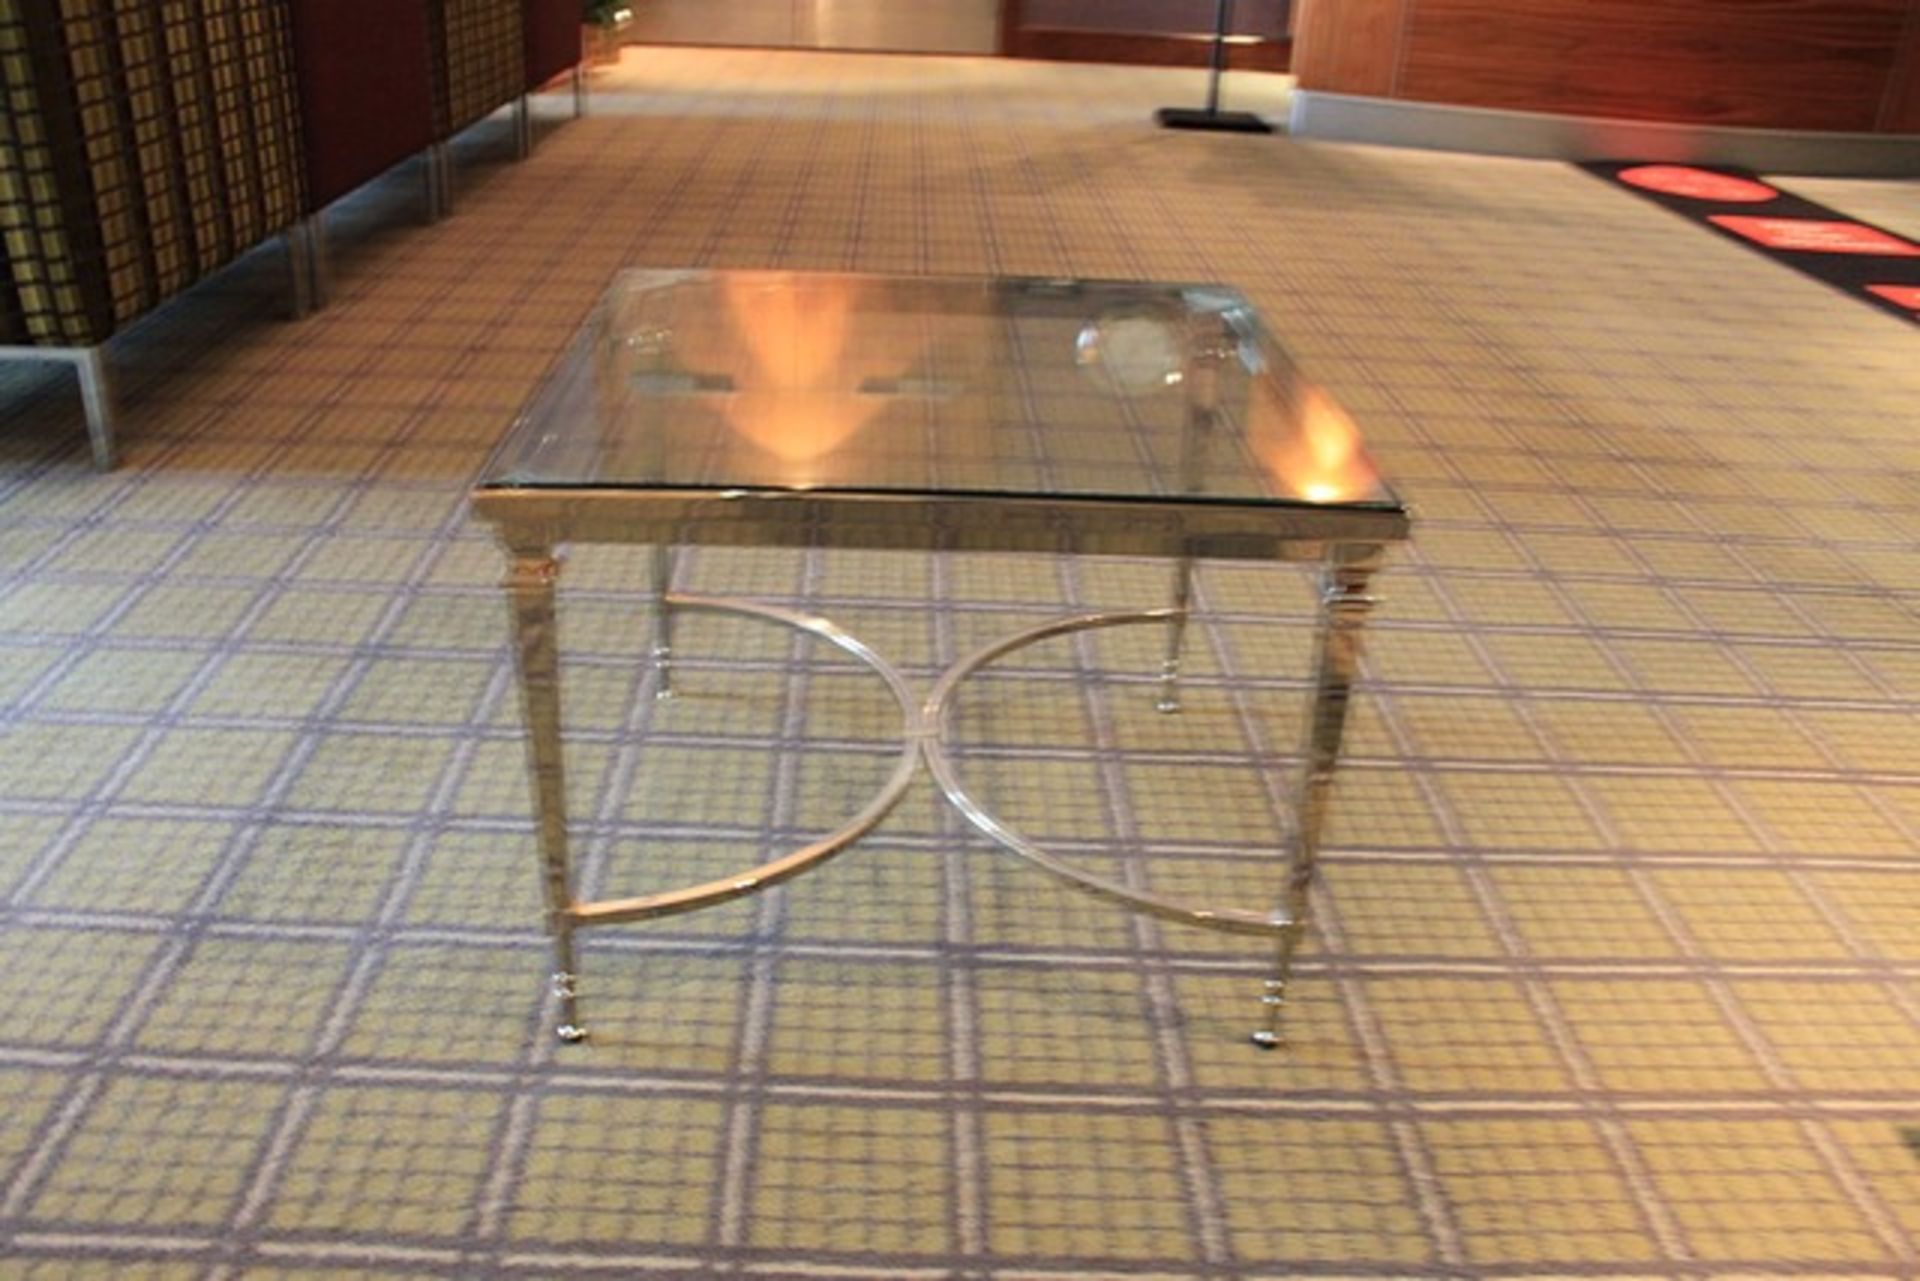 Chelsom Furniture Square Tempered Glass Table Polished Steel Base FSW/F10135 560 X 560 X 430mm - Image 3 of 4